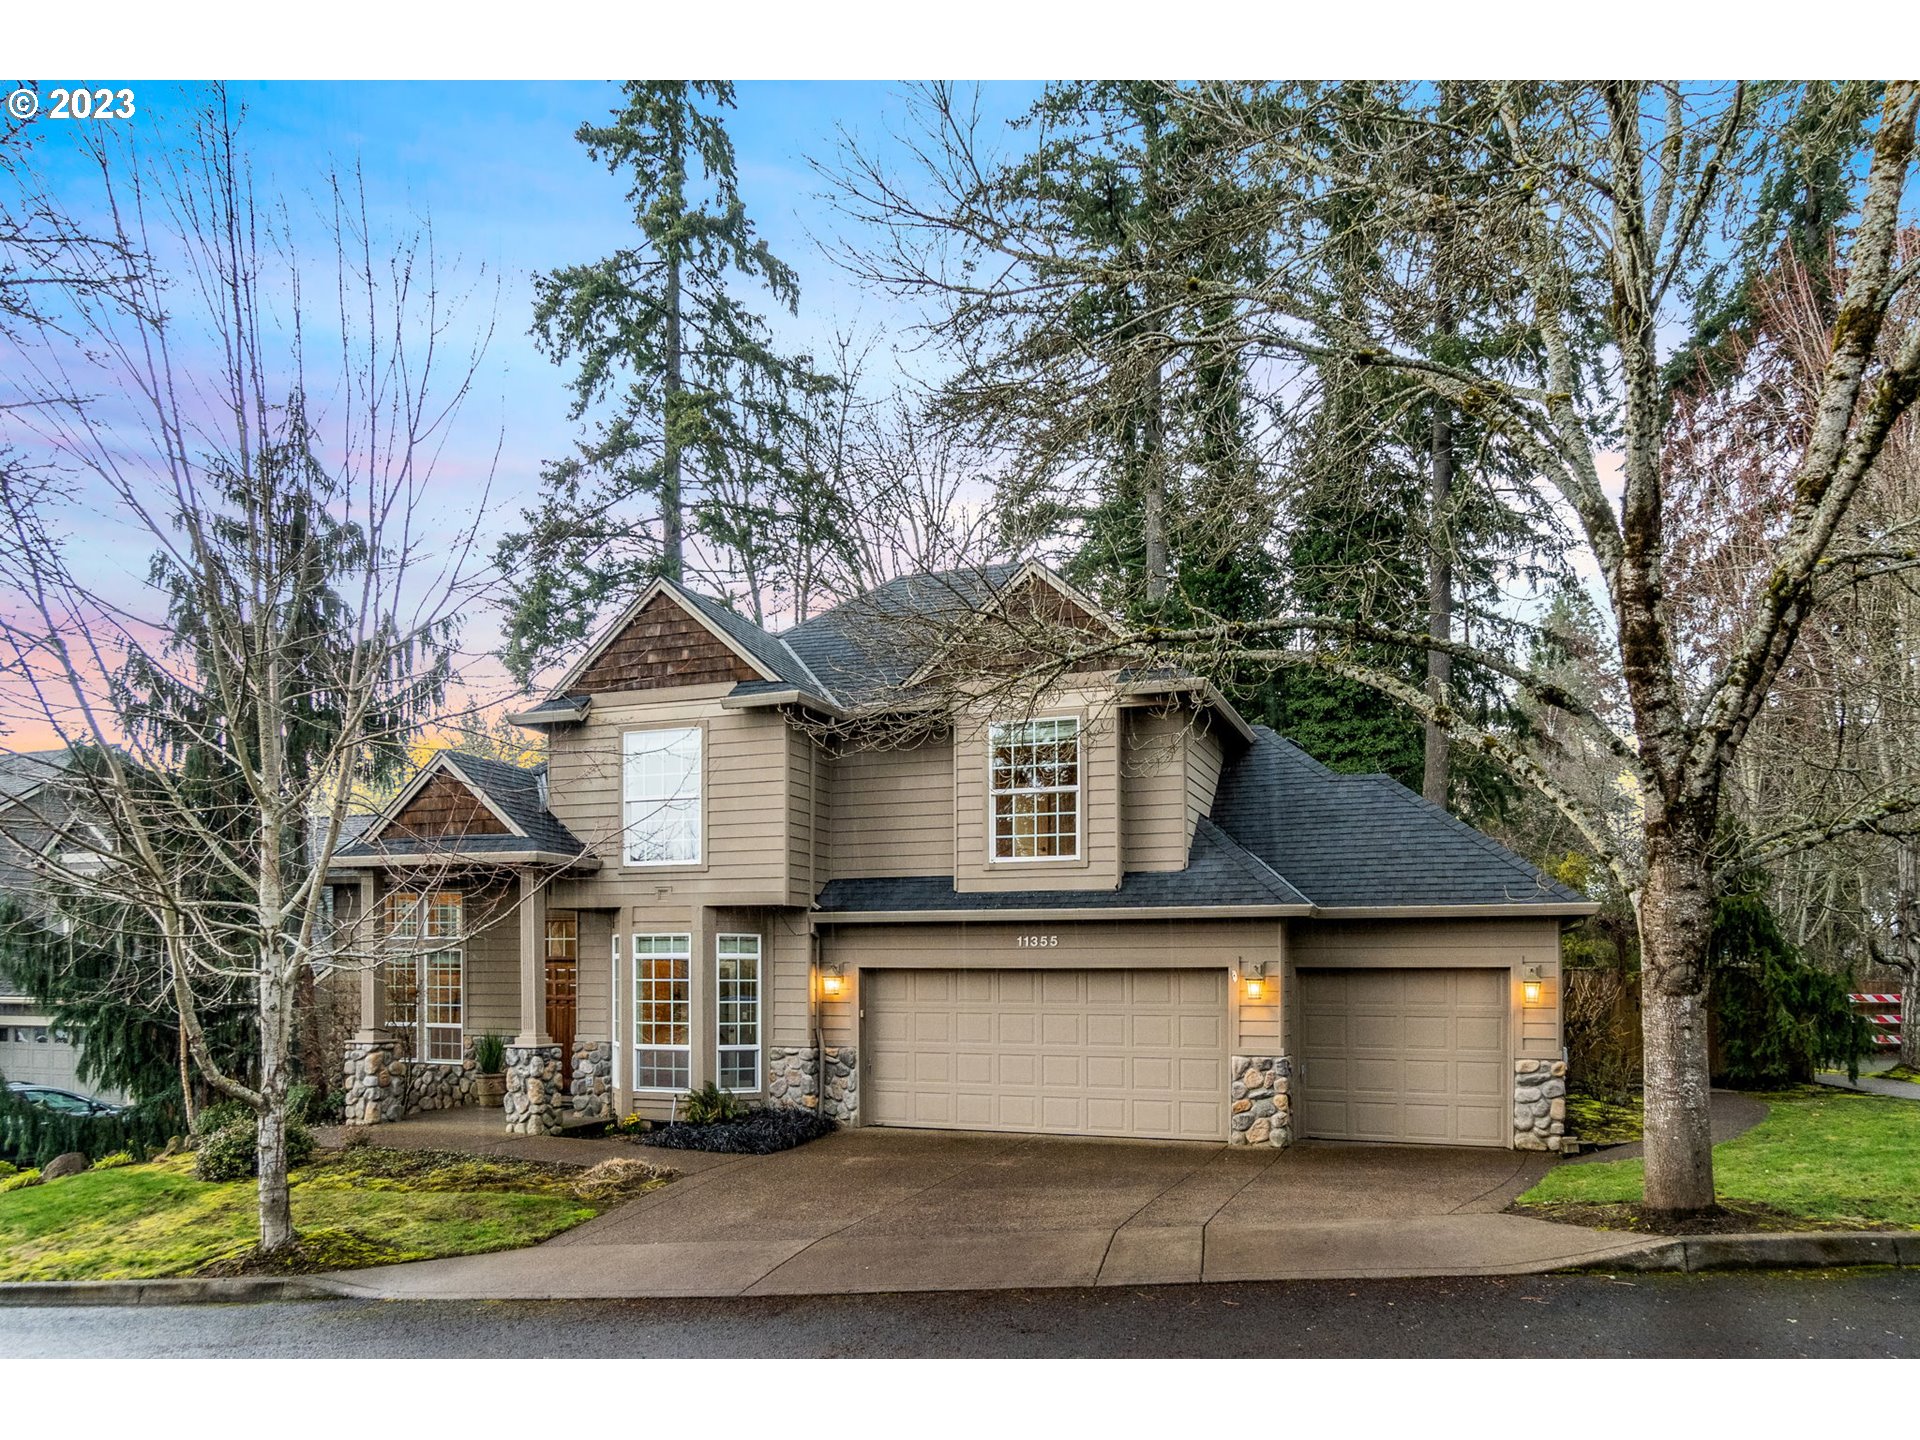 11355 SW SUZANNE CT, Tigard, OR 97223